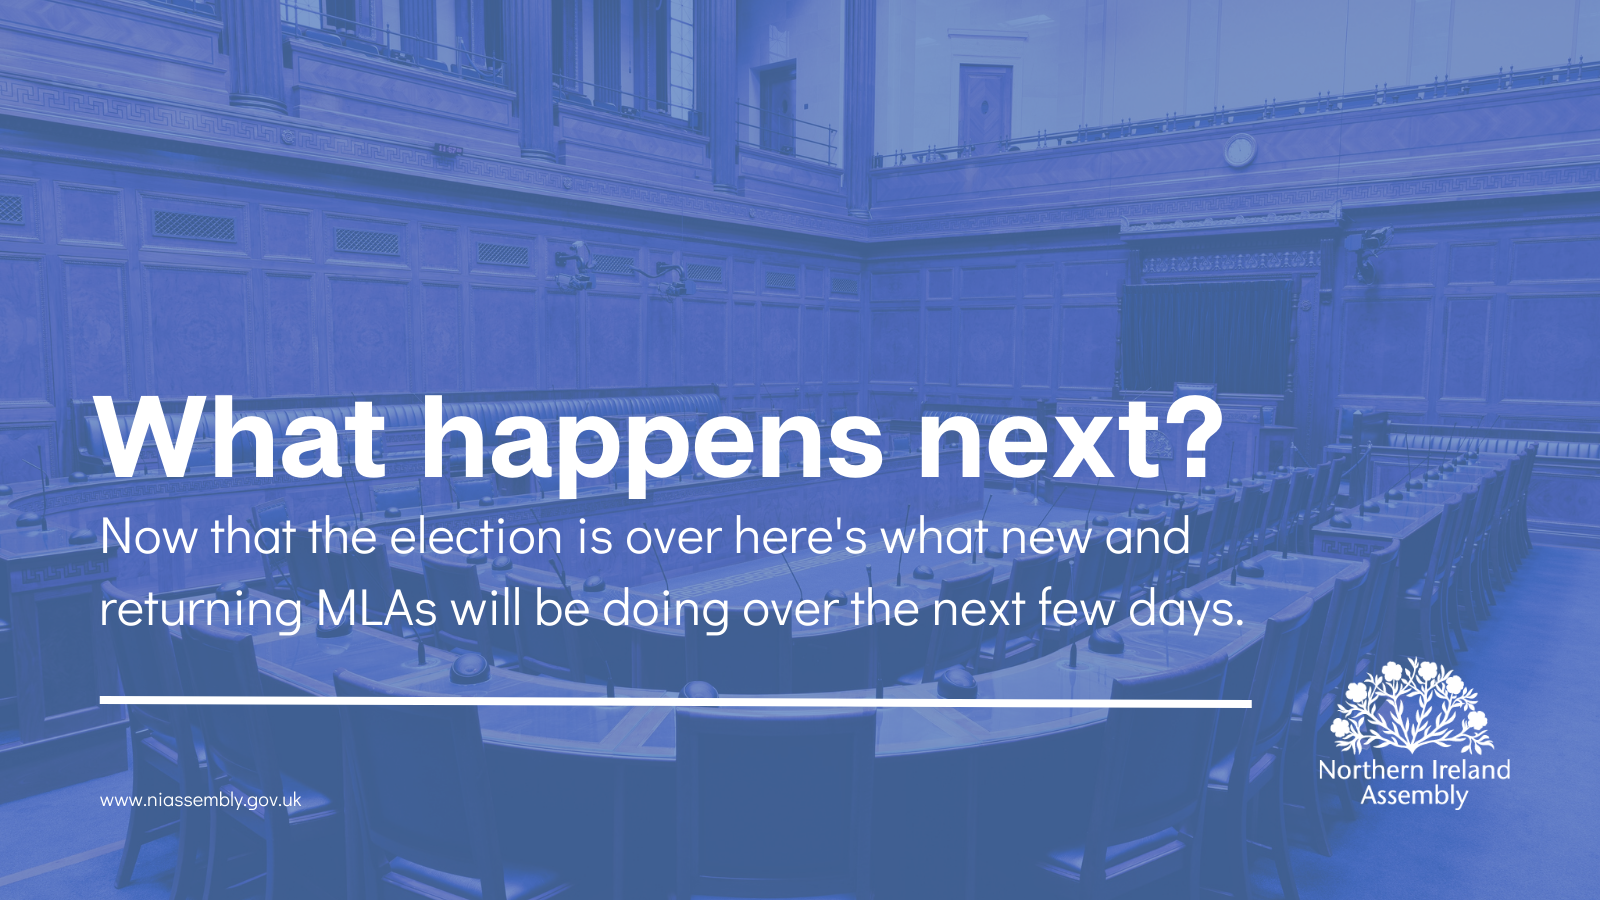 Image of an empty Assembly Chamber with the text "What happens next? Now that the election is over here's what new and returning MLAs will be doing over the next few days."